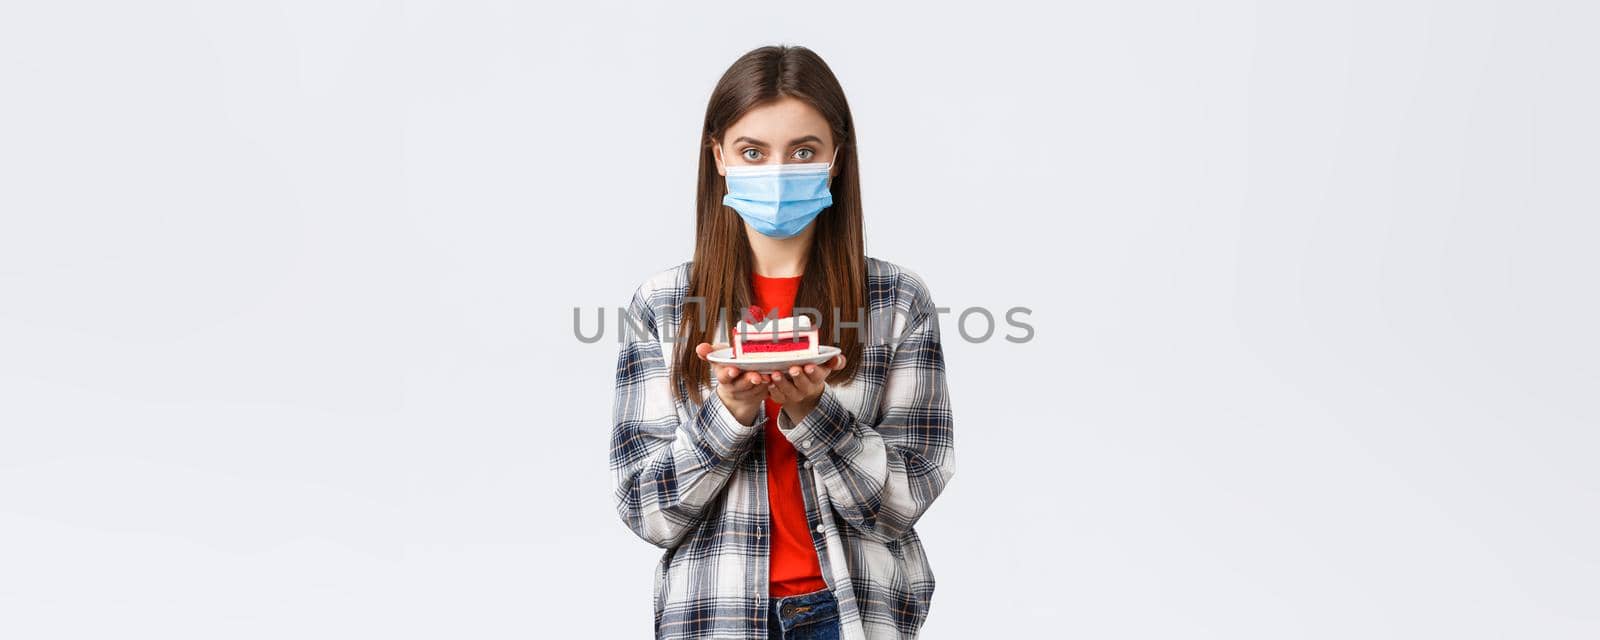 Coronavirus outbreak, lifestyle during social distancing and holidays celebration concept. Young cute girl in medical mask and casual outfit, holding birthday cake and looking serious camera.